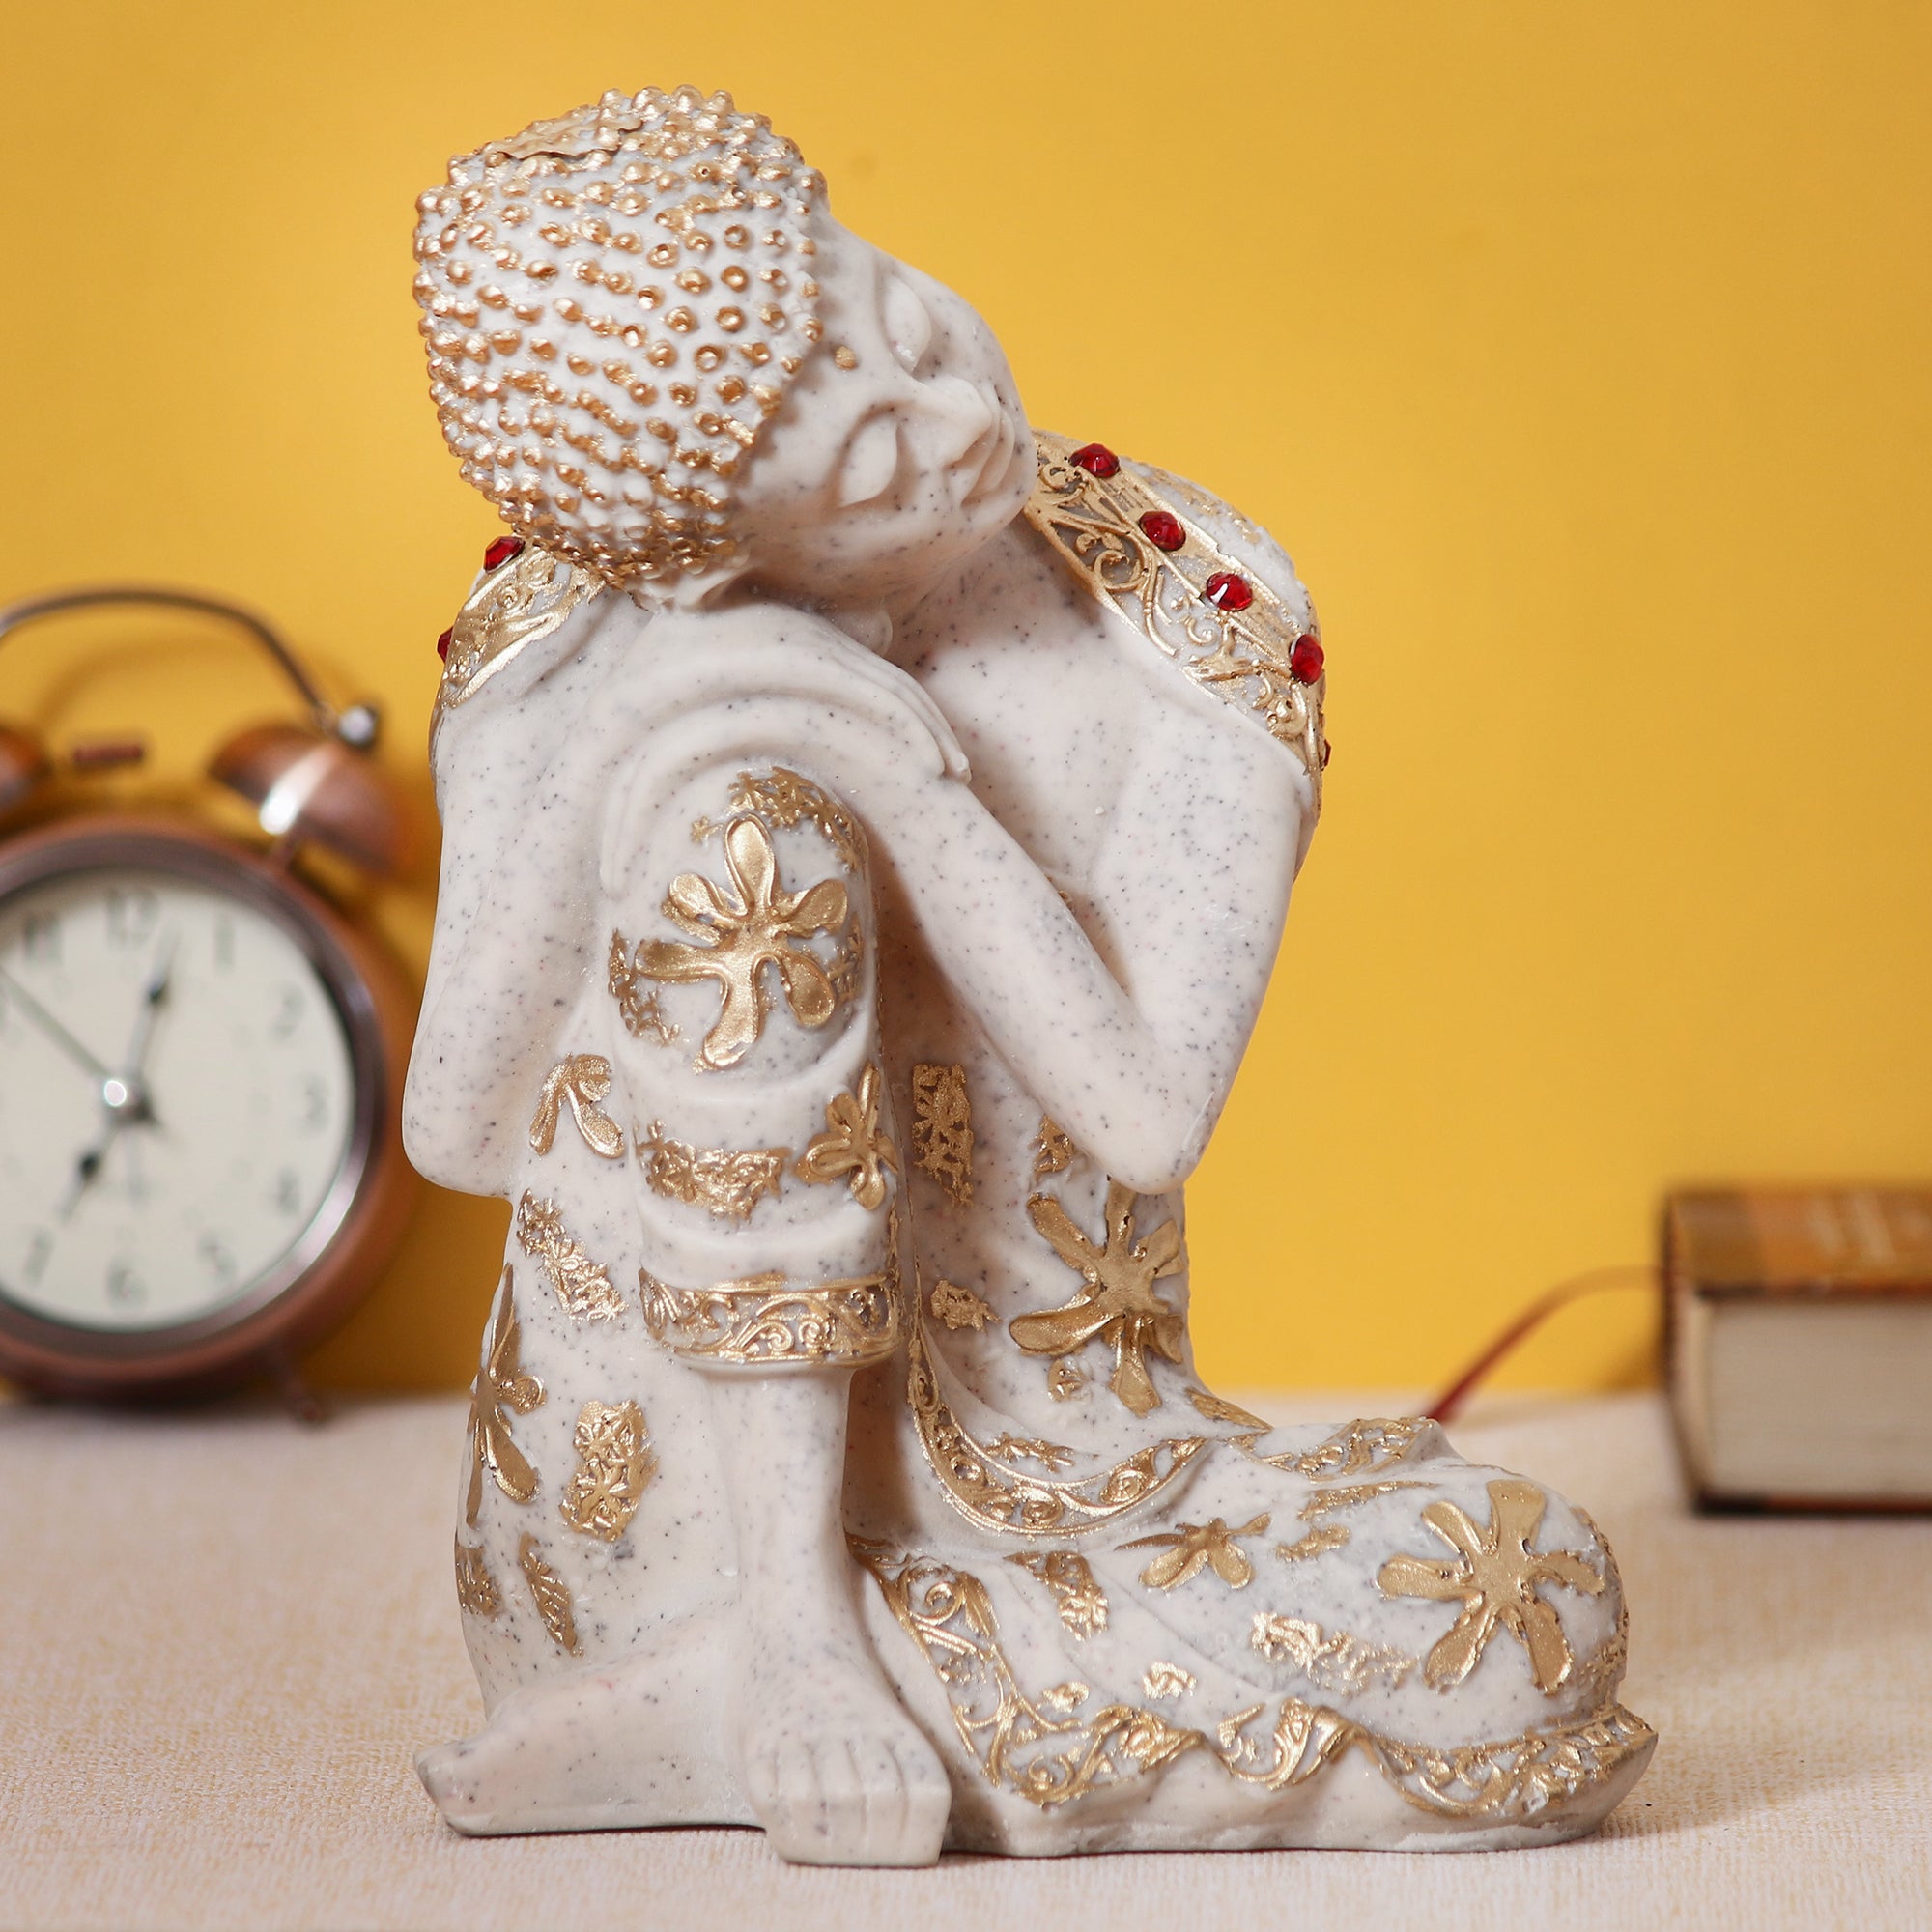 Polyresin White and Golden Resting Buddha on Knee Statue 6